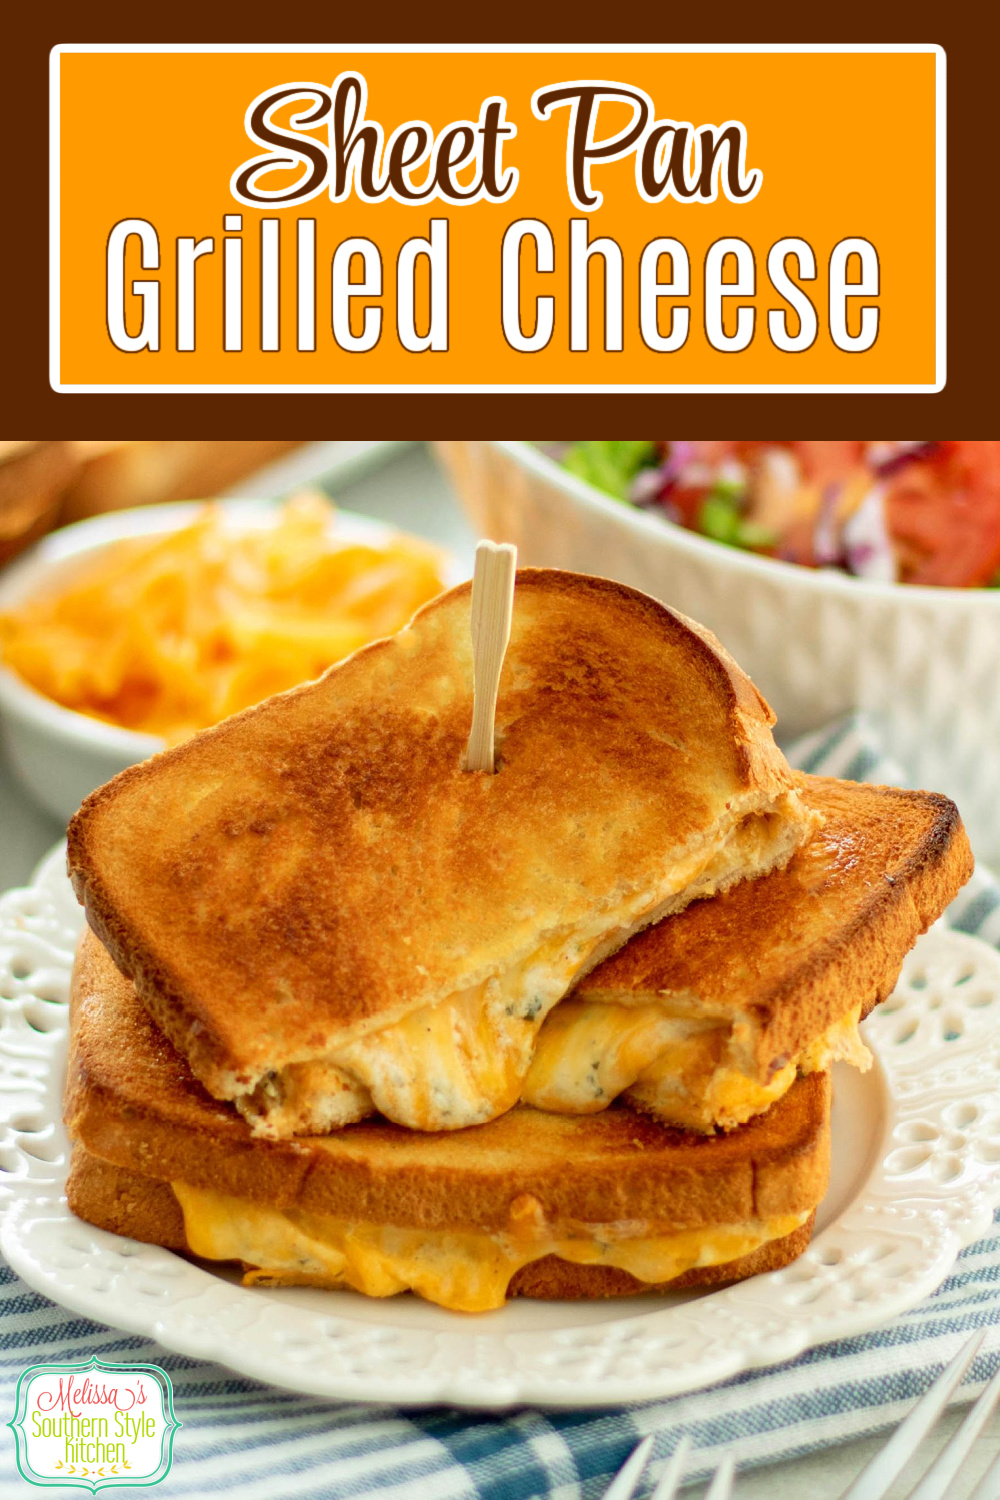 This Sheet Pan Grilled Cheese recipe shows you how to make gooey garlic and herb grilled cheese sandwiches for the family in one fell swoop. #grilledcheese #grilledcheesesandwiches #grilledcheeserecipes #sheetpanmeals #sheetpangrilledcheese #bakedgrilledcheese #garlicbread #garlicherbcheese via @melissasssk